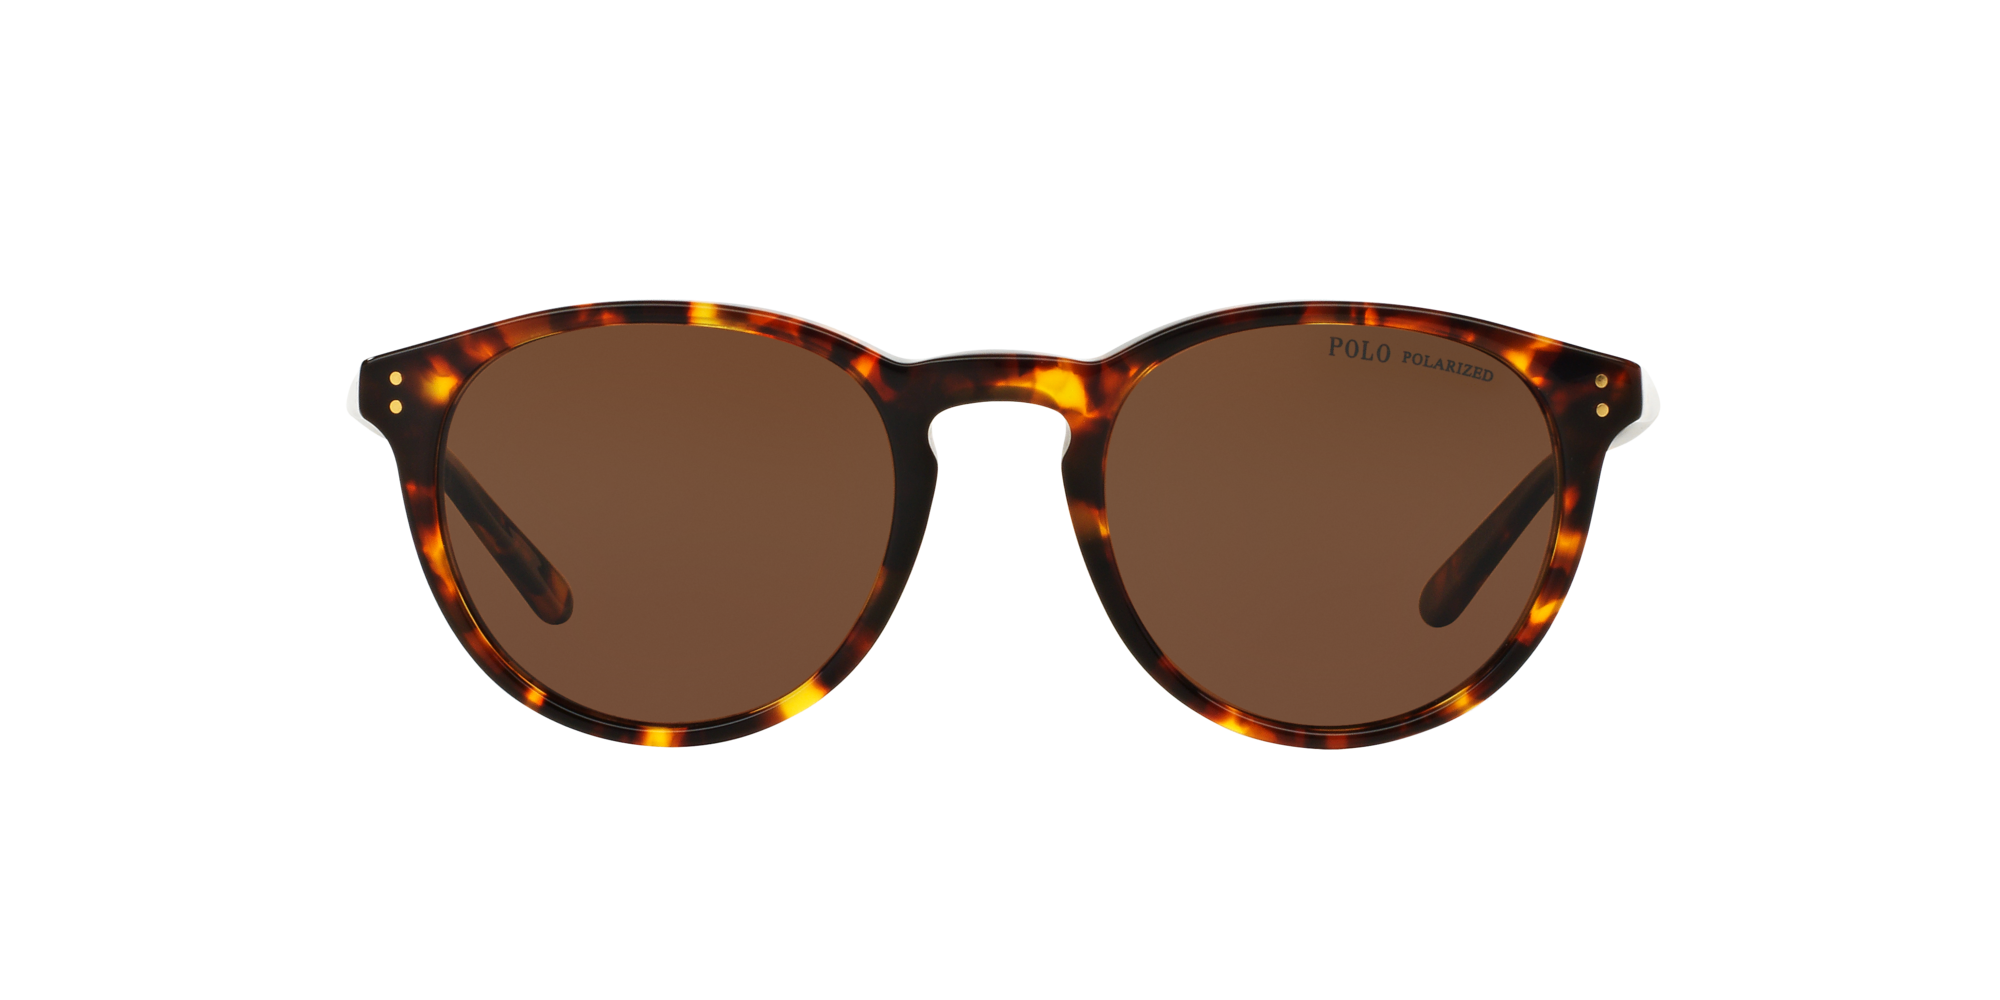 Polo Ralph Lauren PH4110 Sunglasses Review | VisionDirect - YouTube